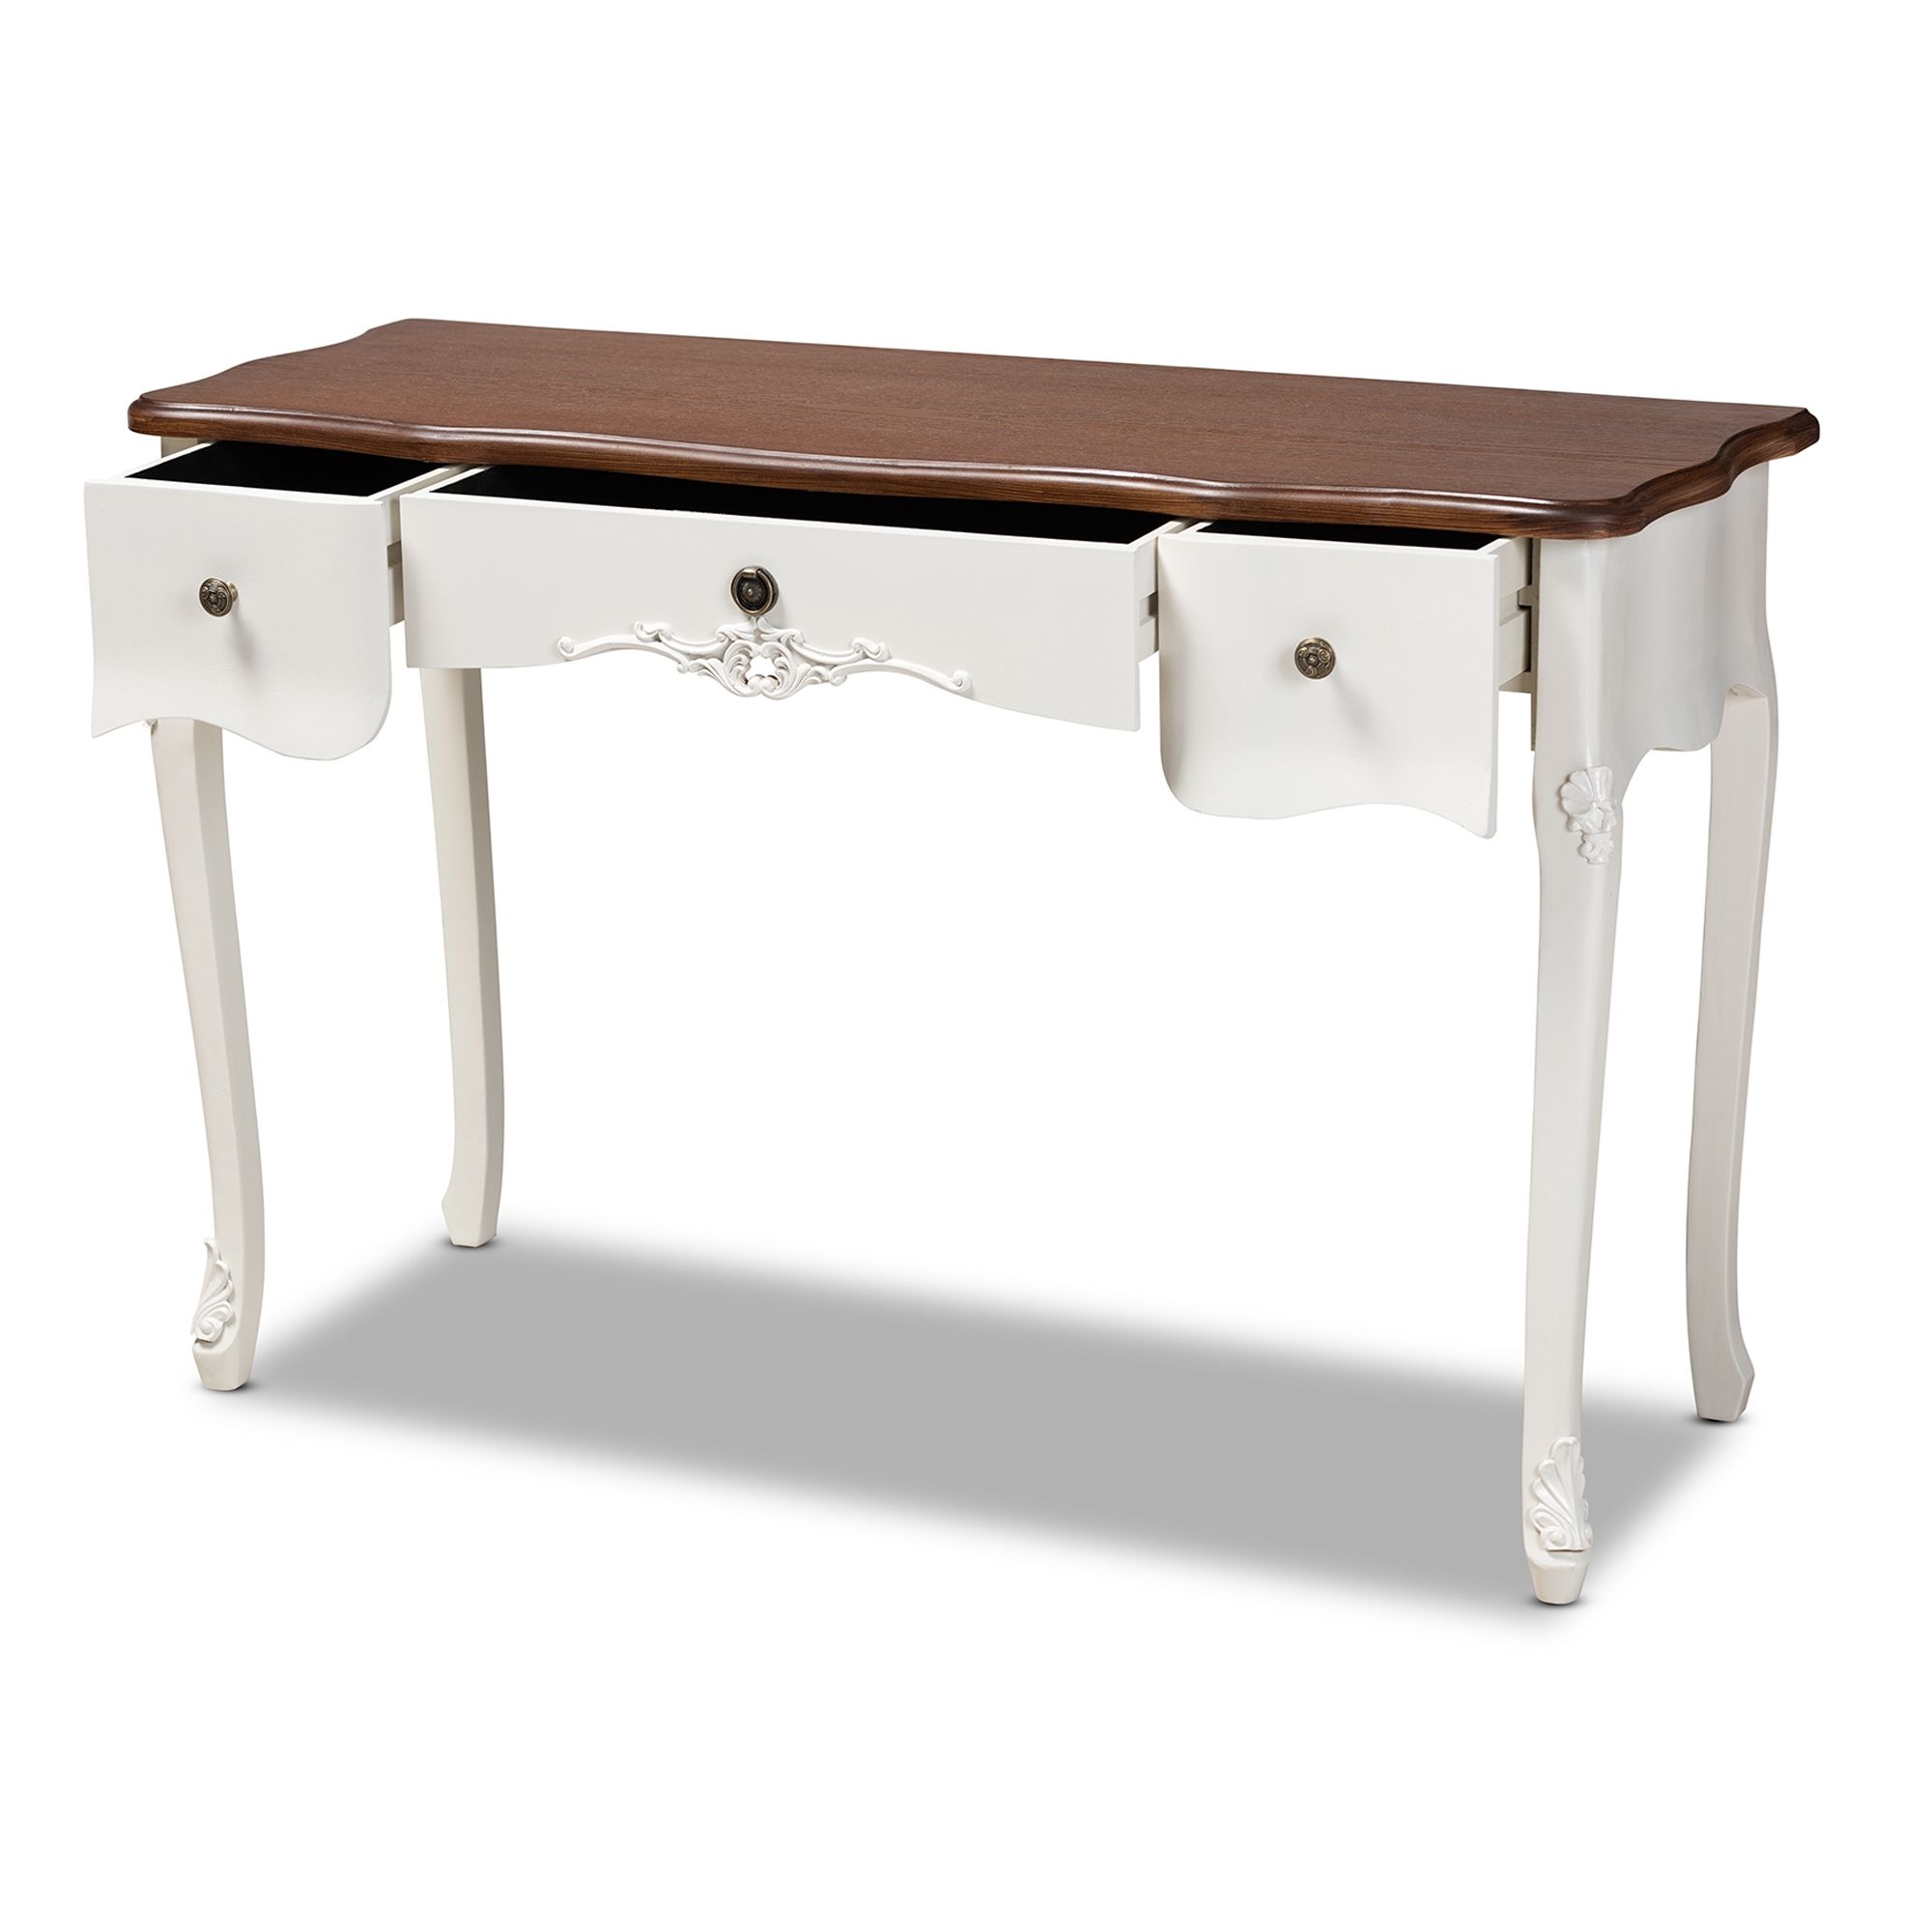 Sophie Classic French Country White & Brown Finished 3 Intended For Smoke Gray Wood Square Console Tables (View 9 of 20)